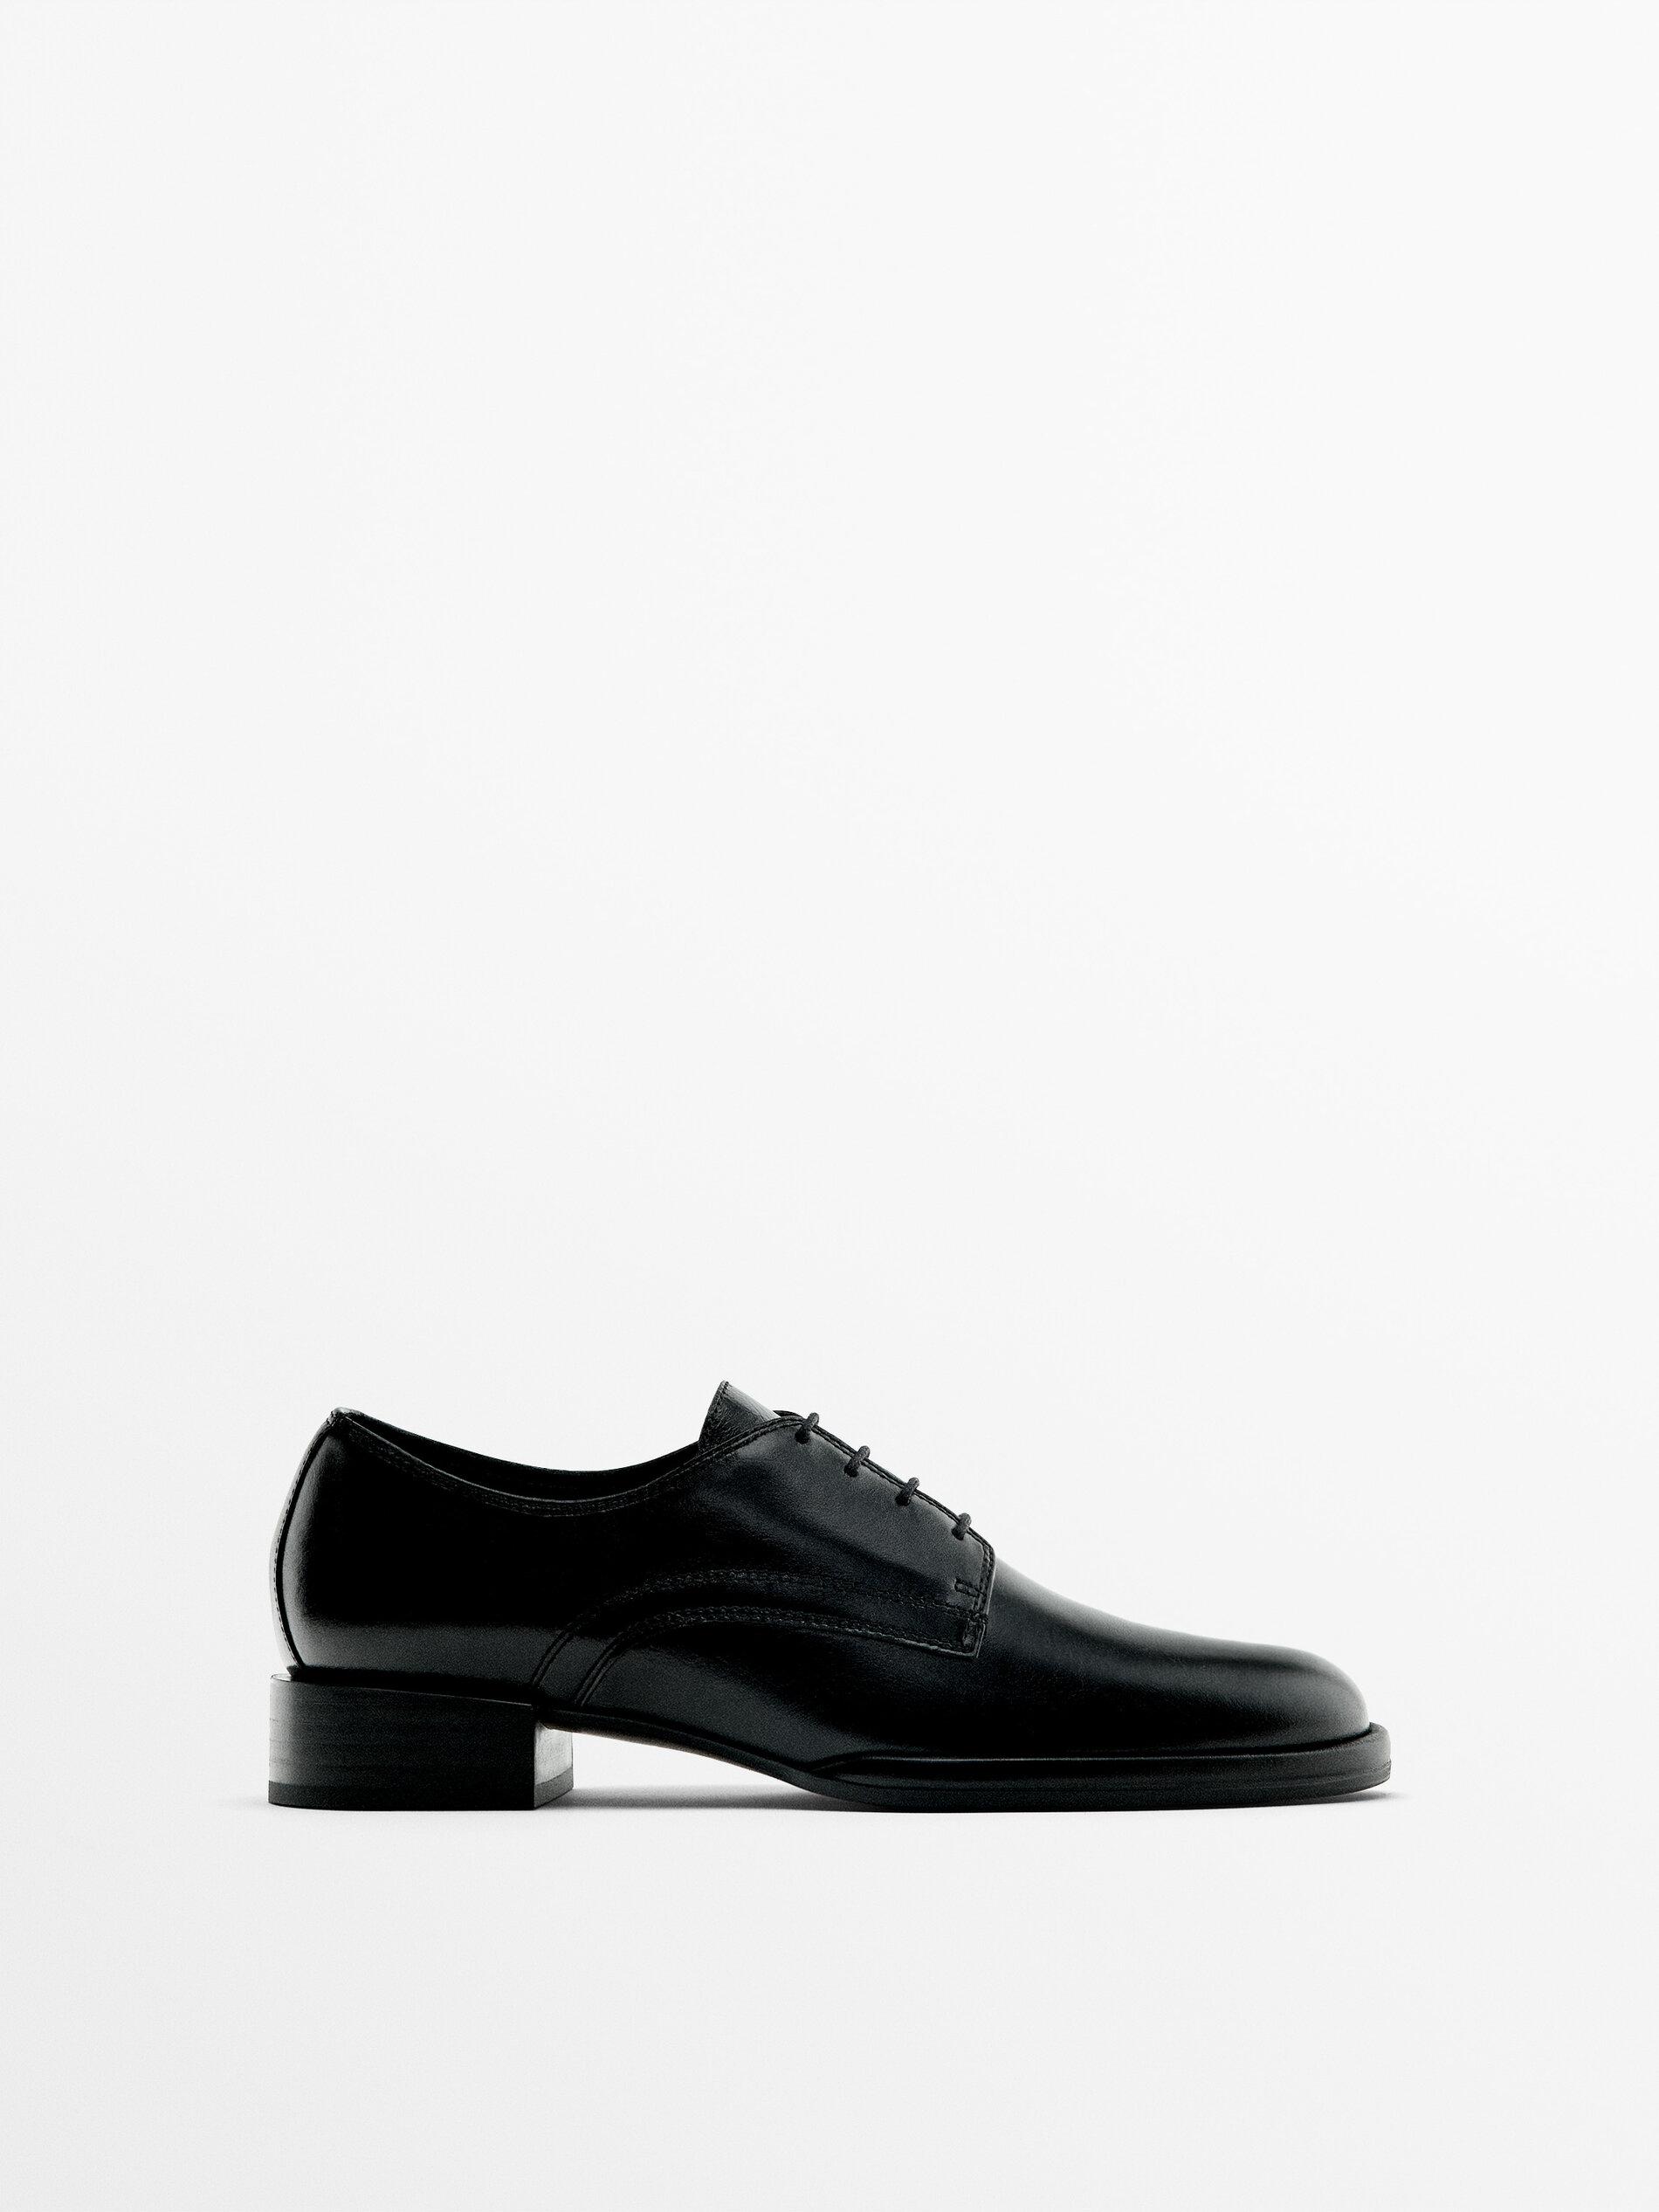 MASSIMO DUTTI Flat Lace-Up Shoes in Black | Lyst